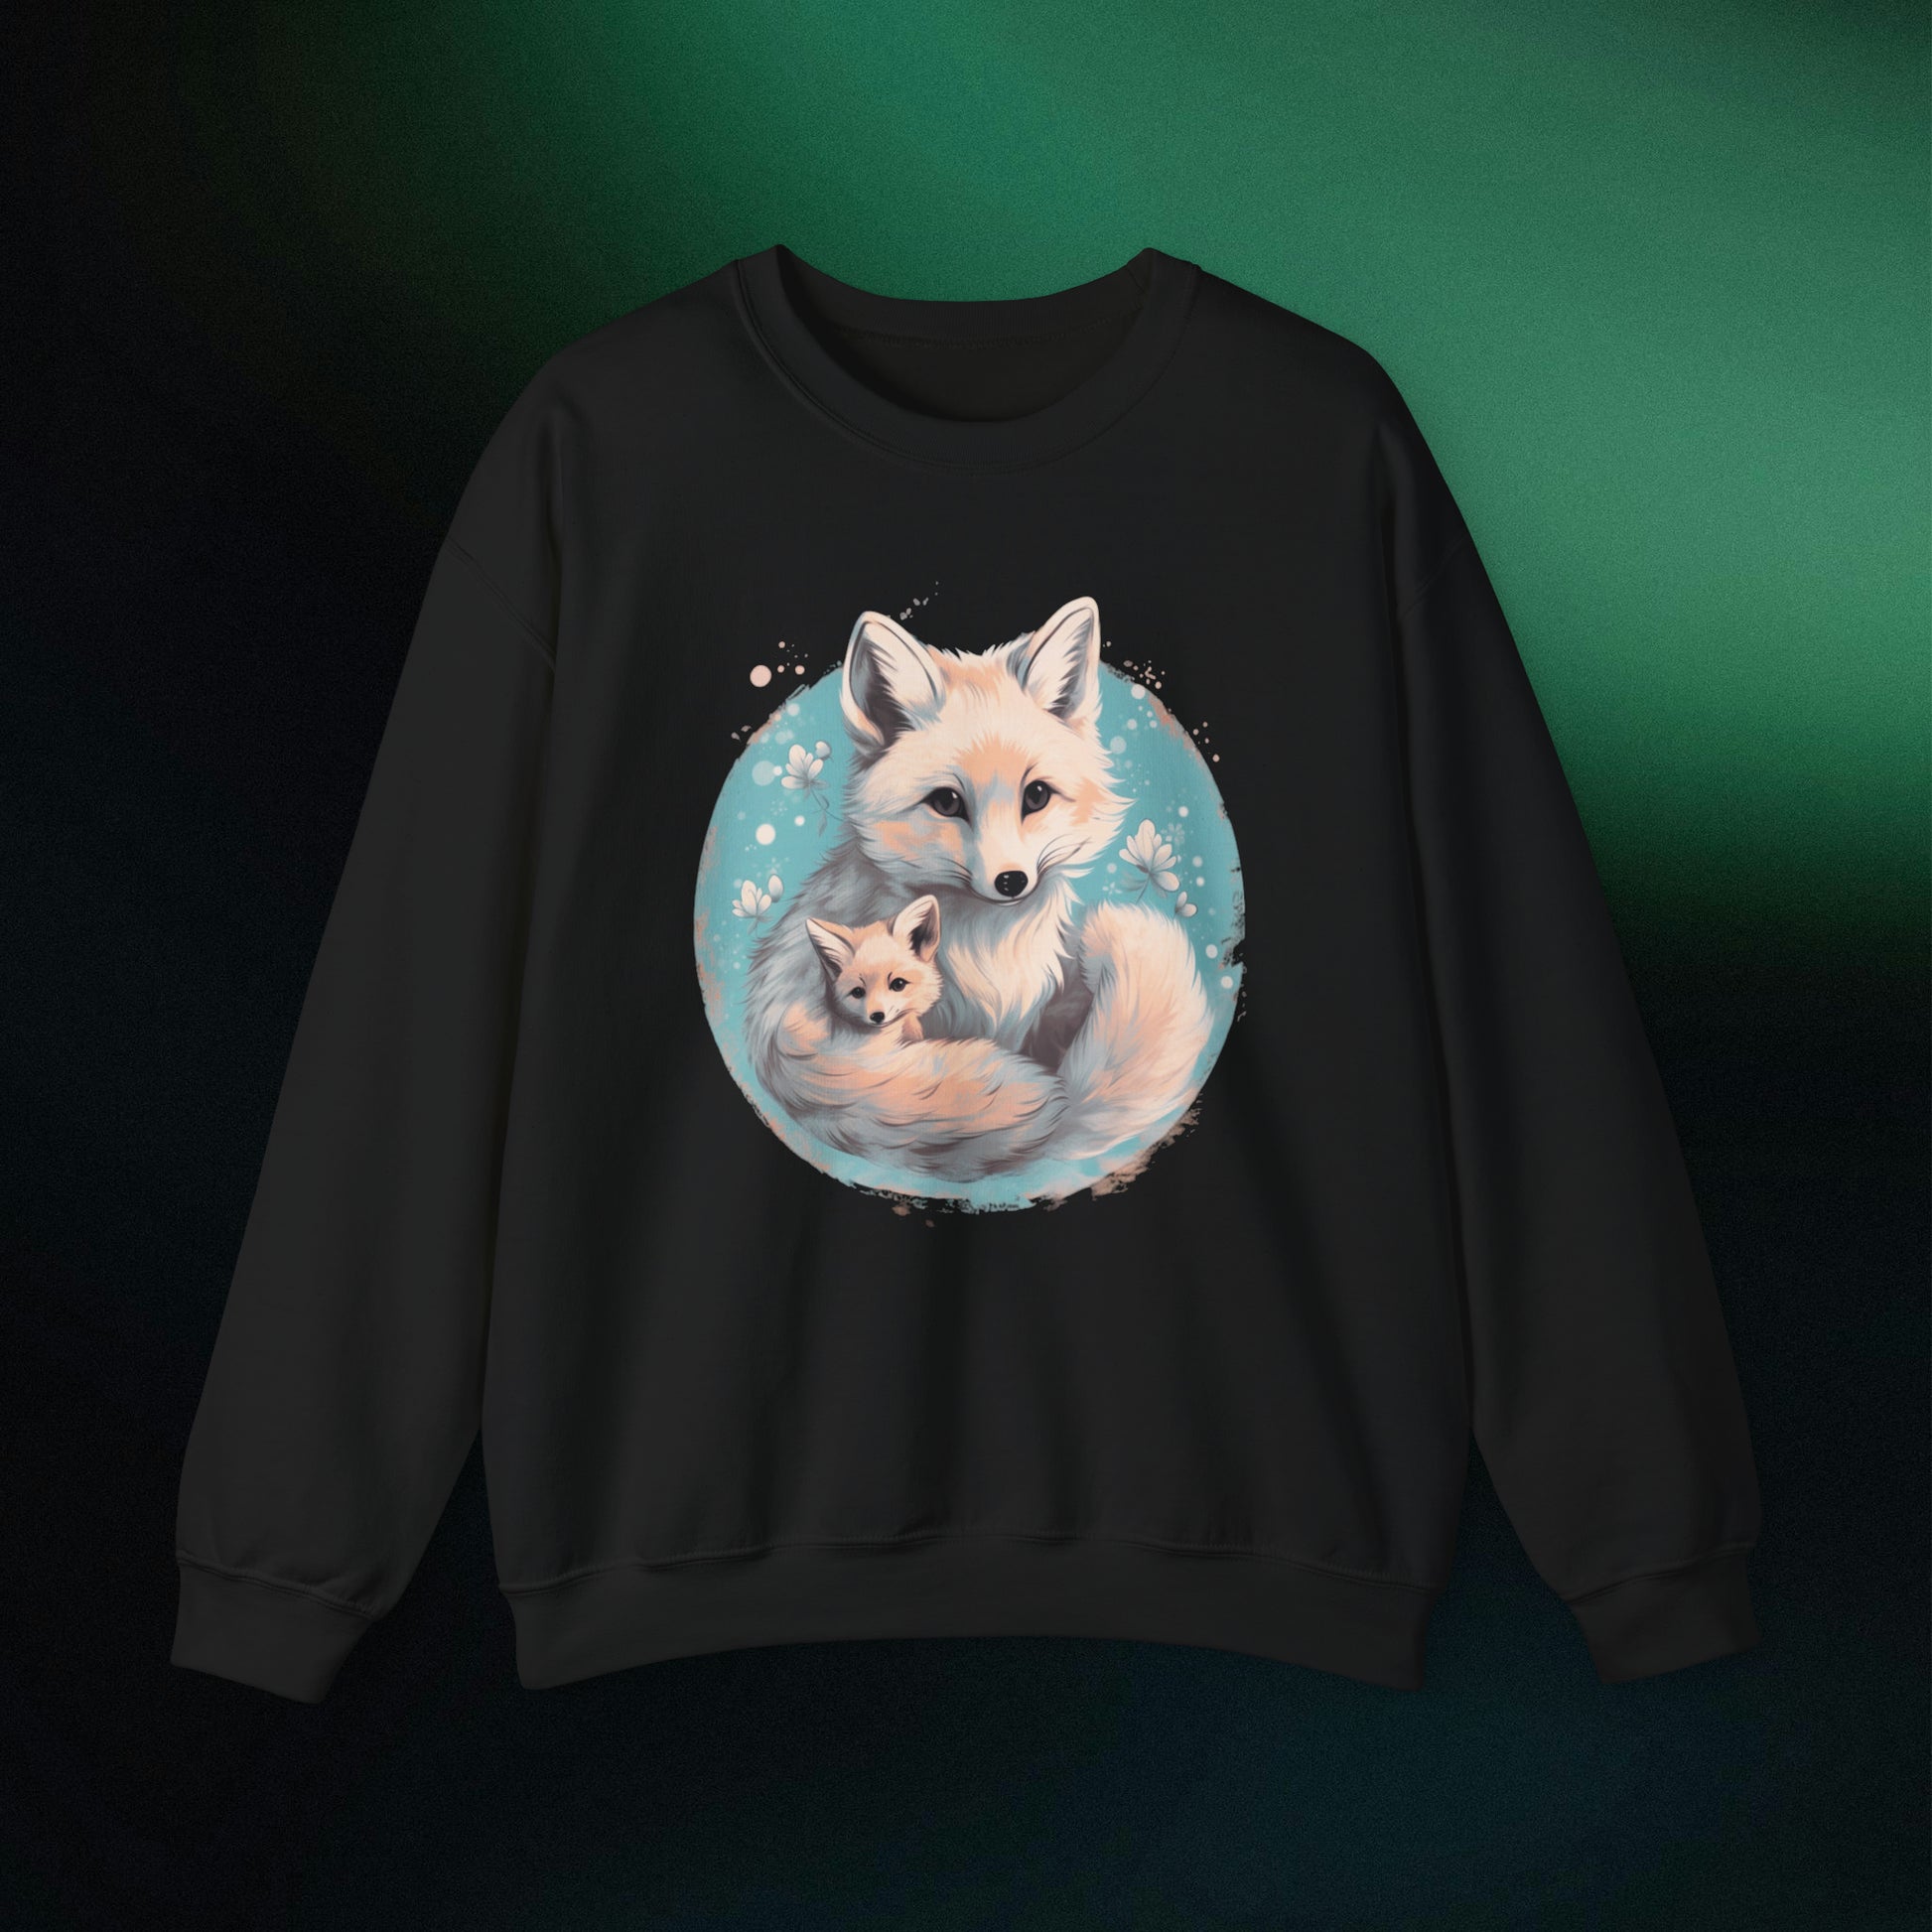 Vintage Forest Witch Aesthetic Sweatshirt - Cozy Fox Cottagecore Sweater with Mommy and Baby Fox Design Sweatshirt S Black 